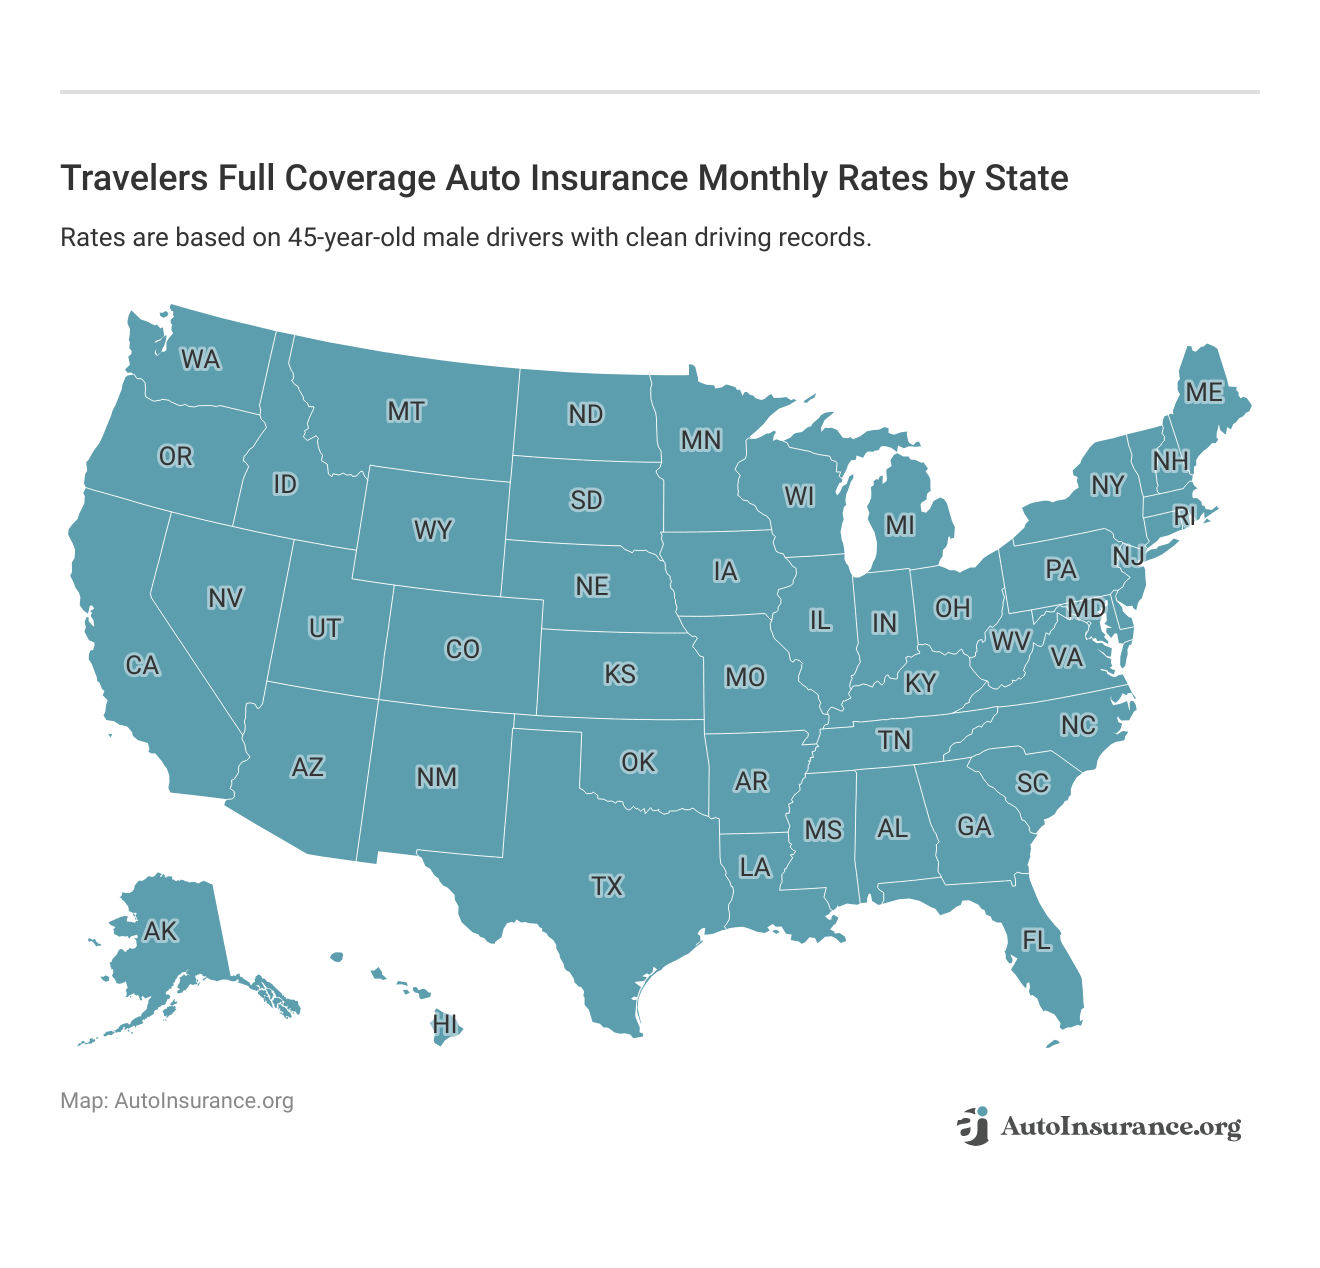 <h3>Travelers Full Coverage Auto Insurance Monthly Rates by State</h3>